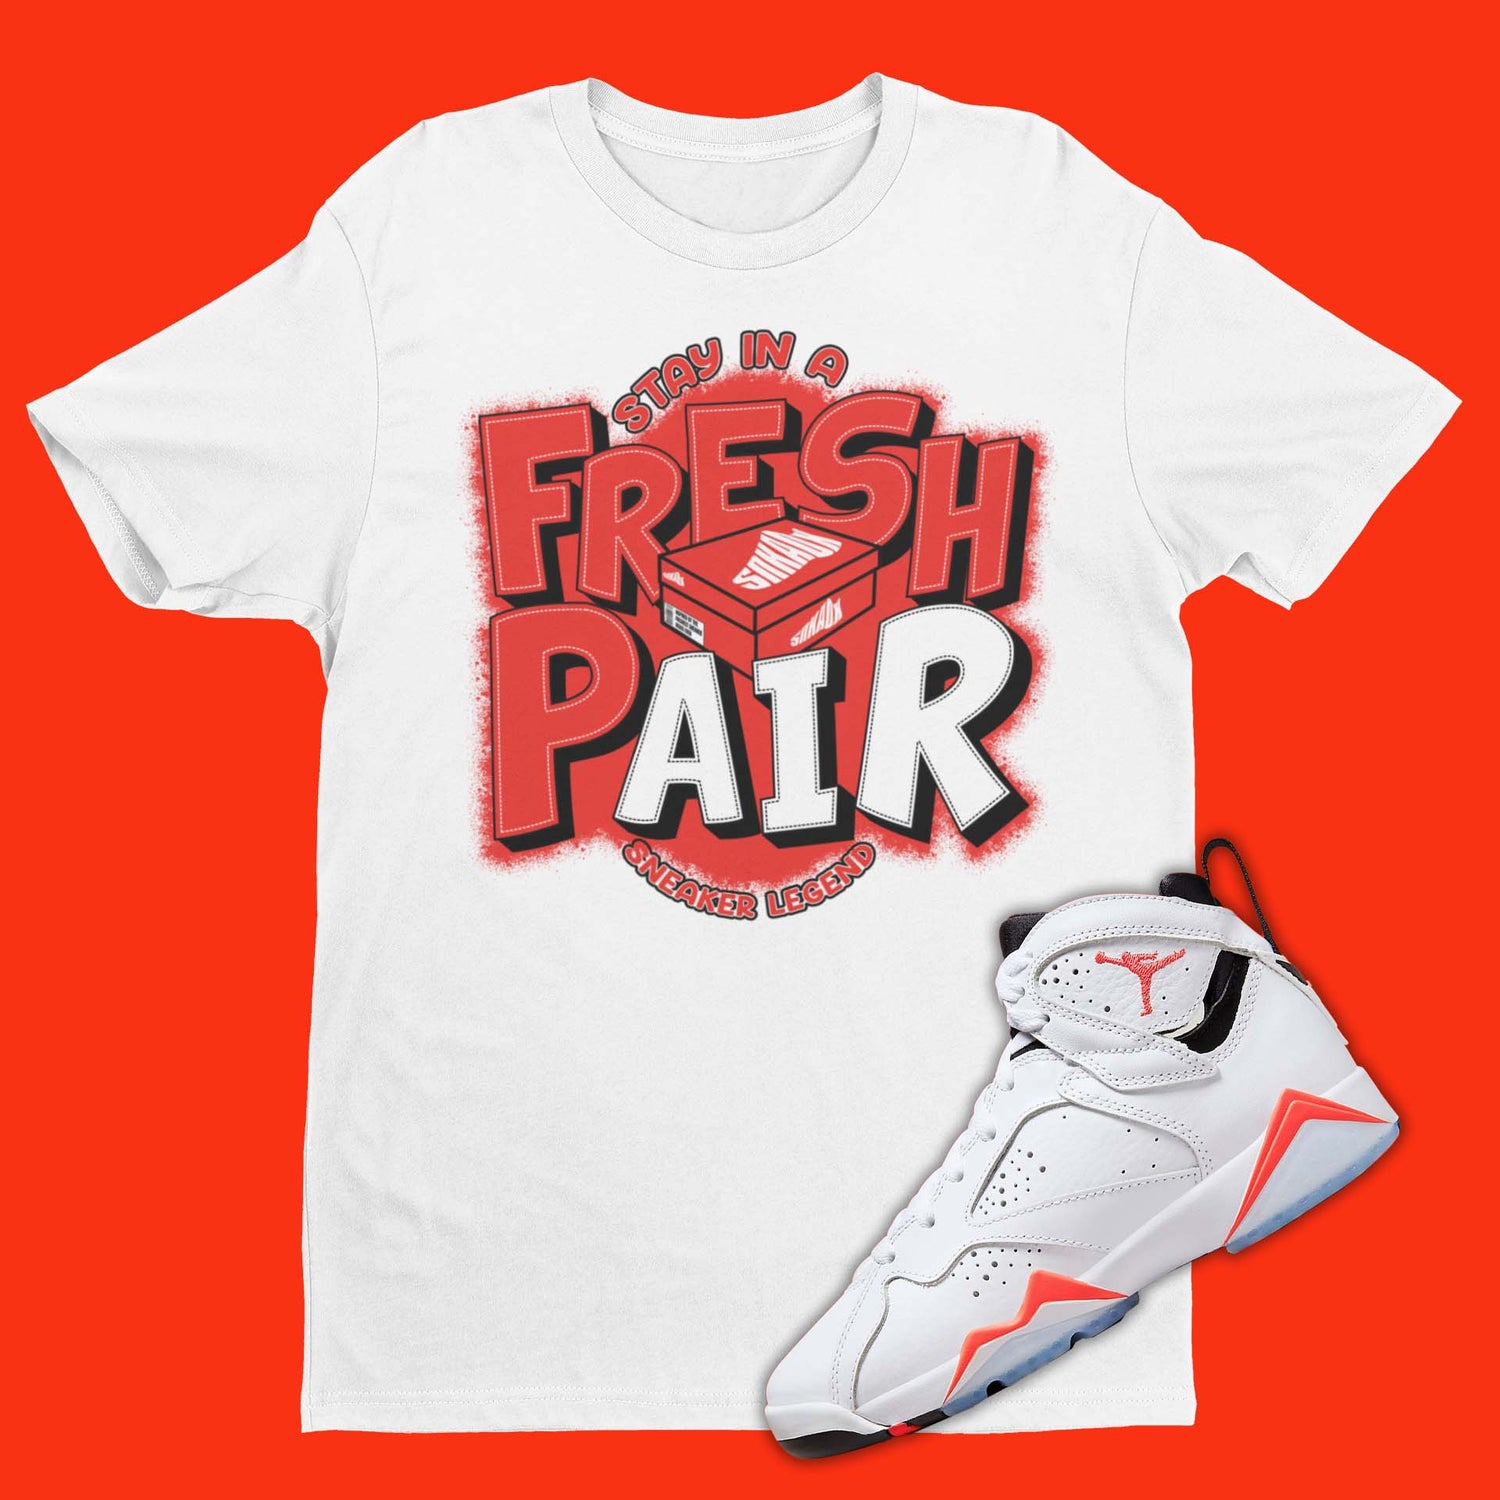 Fresh Pair Shirt Matching Air Jordan 7 White Infrared with shoe box on the front